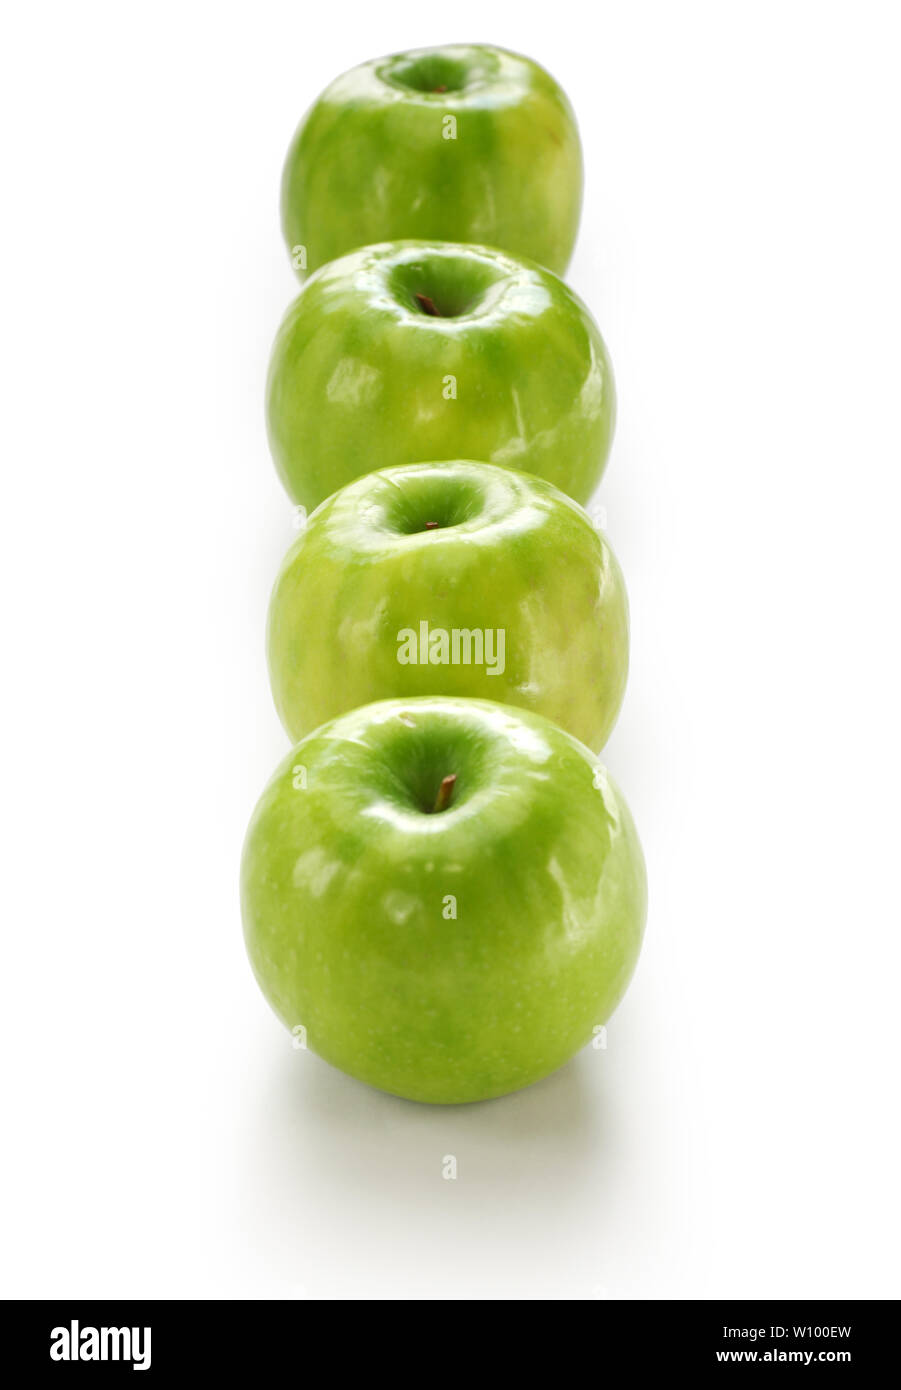 four green apples isolated on white background Stock Photo